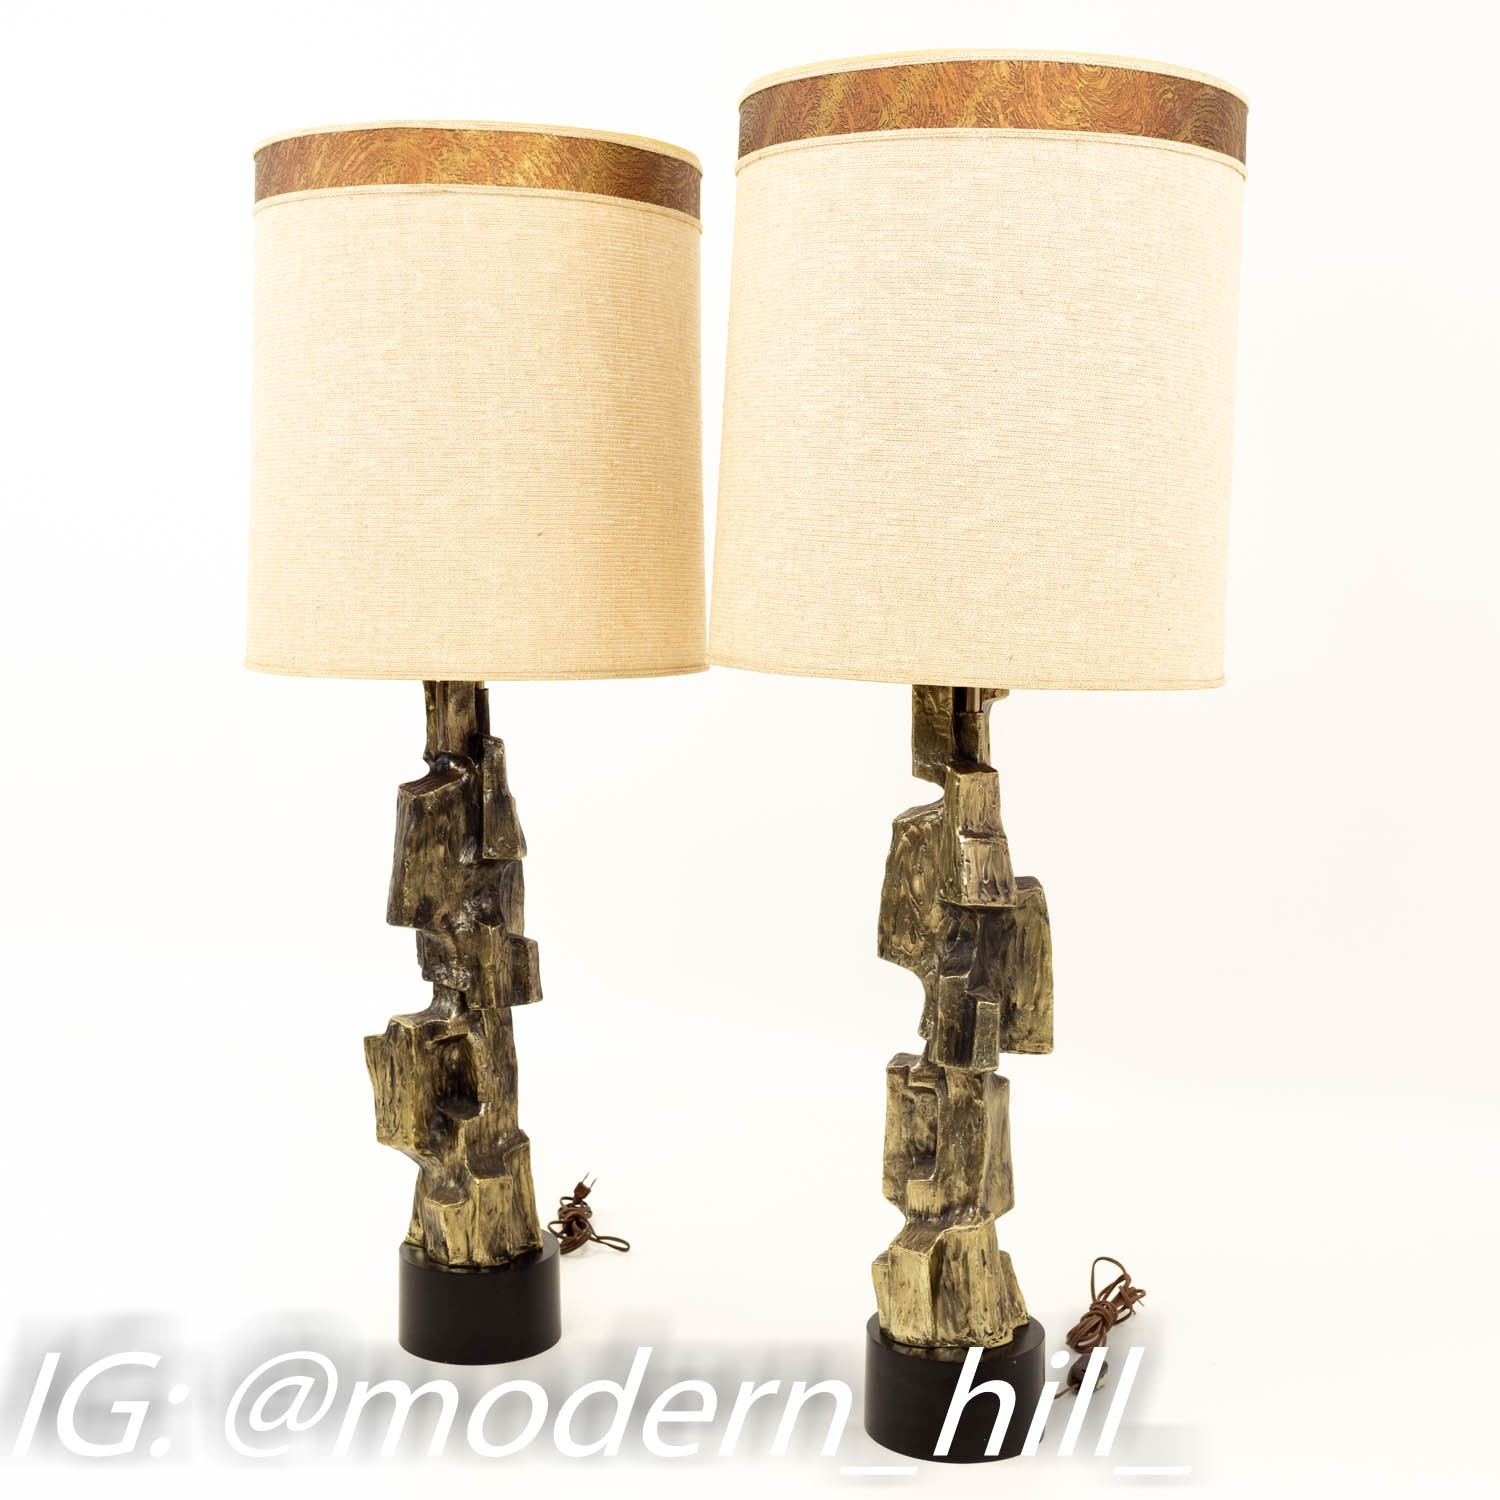 Richard Barr and Harold Weiss for Laurel Tall Weathered Brass Mid Century Table Lamp with Original Shades